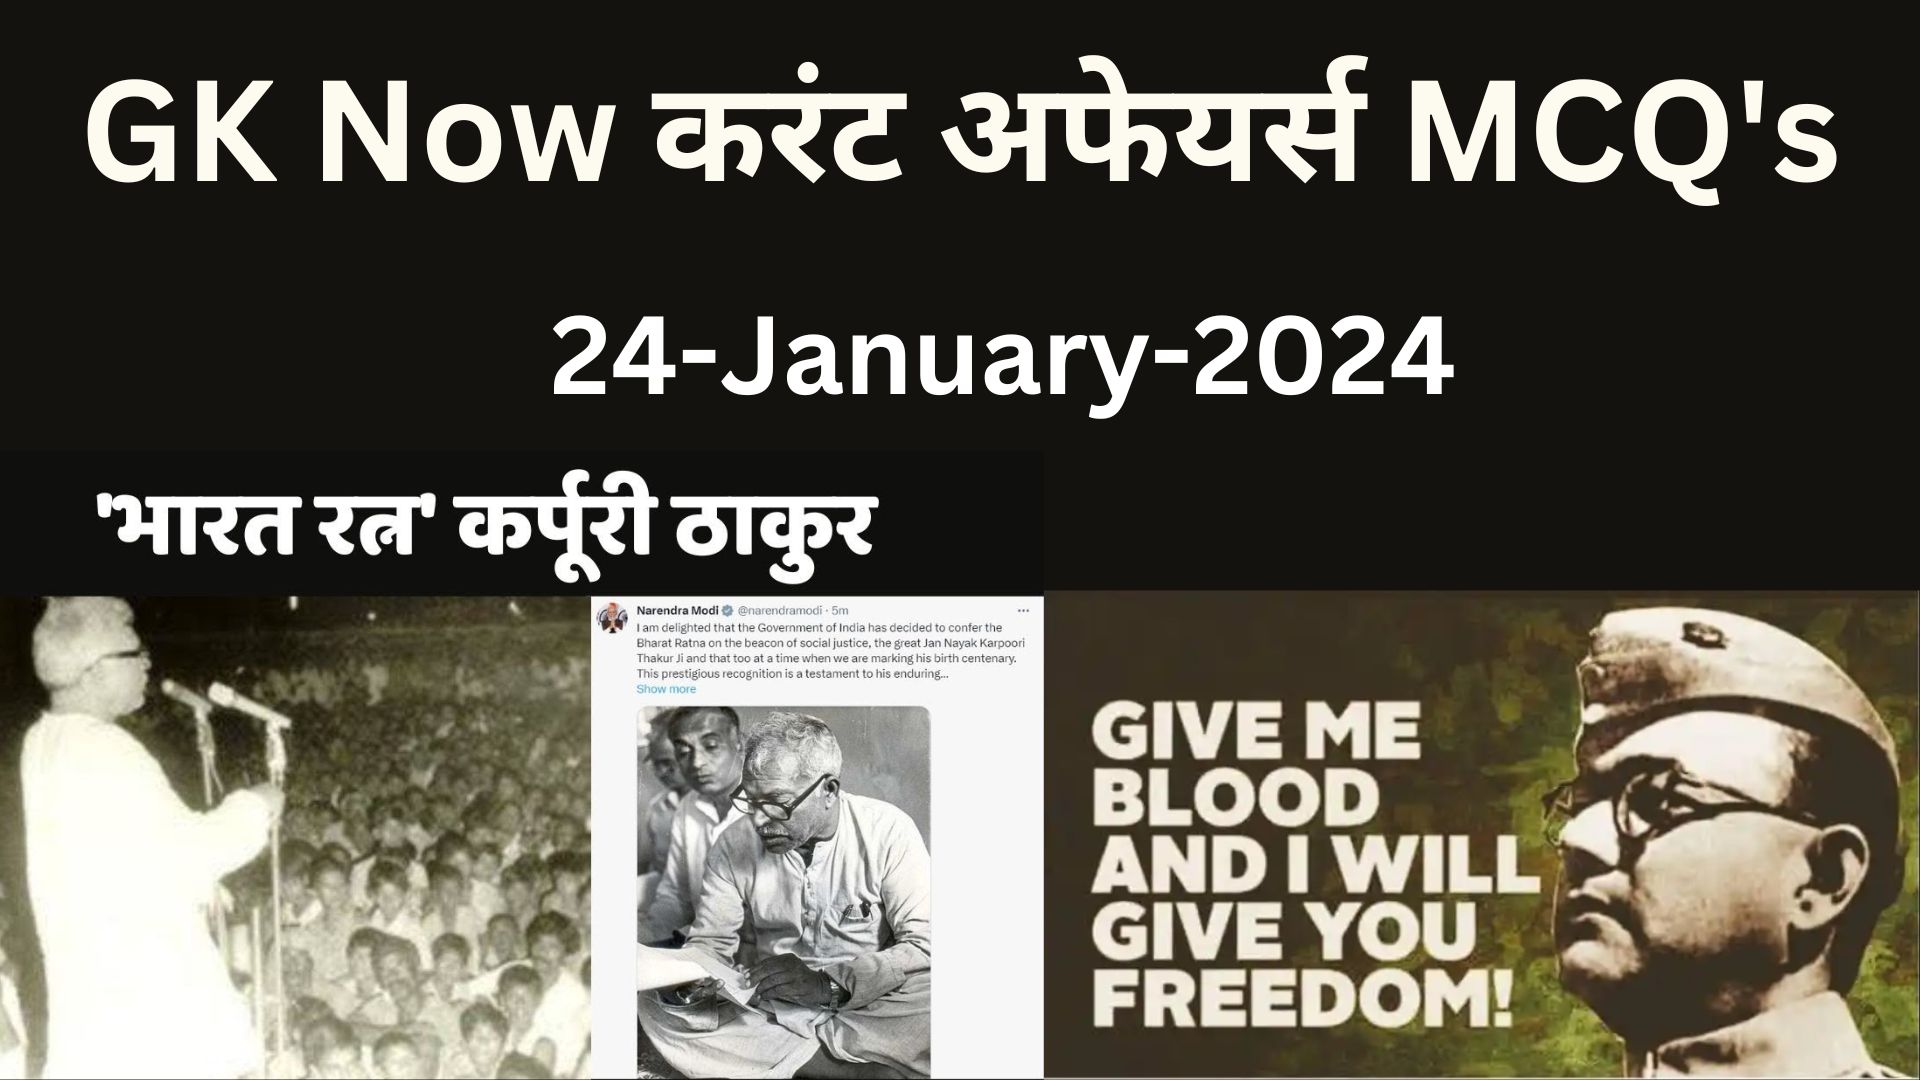 Daily Current Affairs MCQ 24 January 2024 GK Now